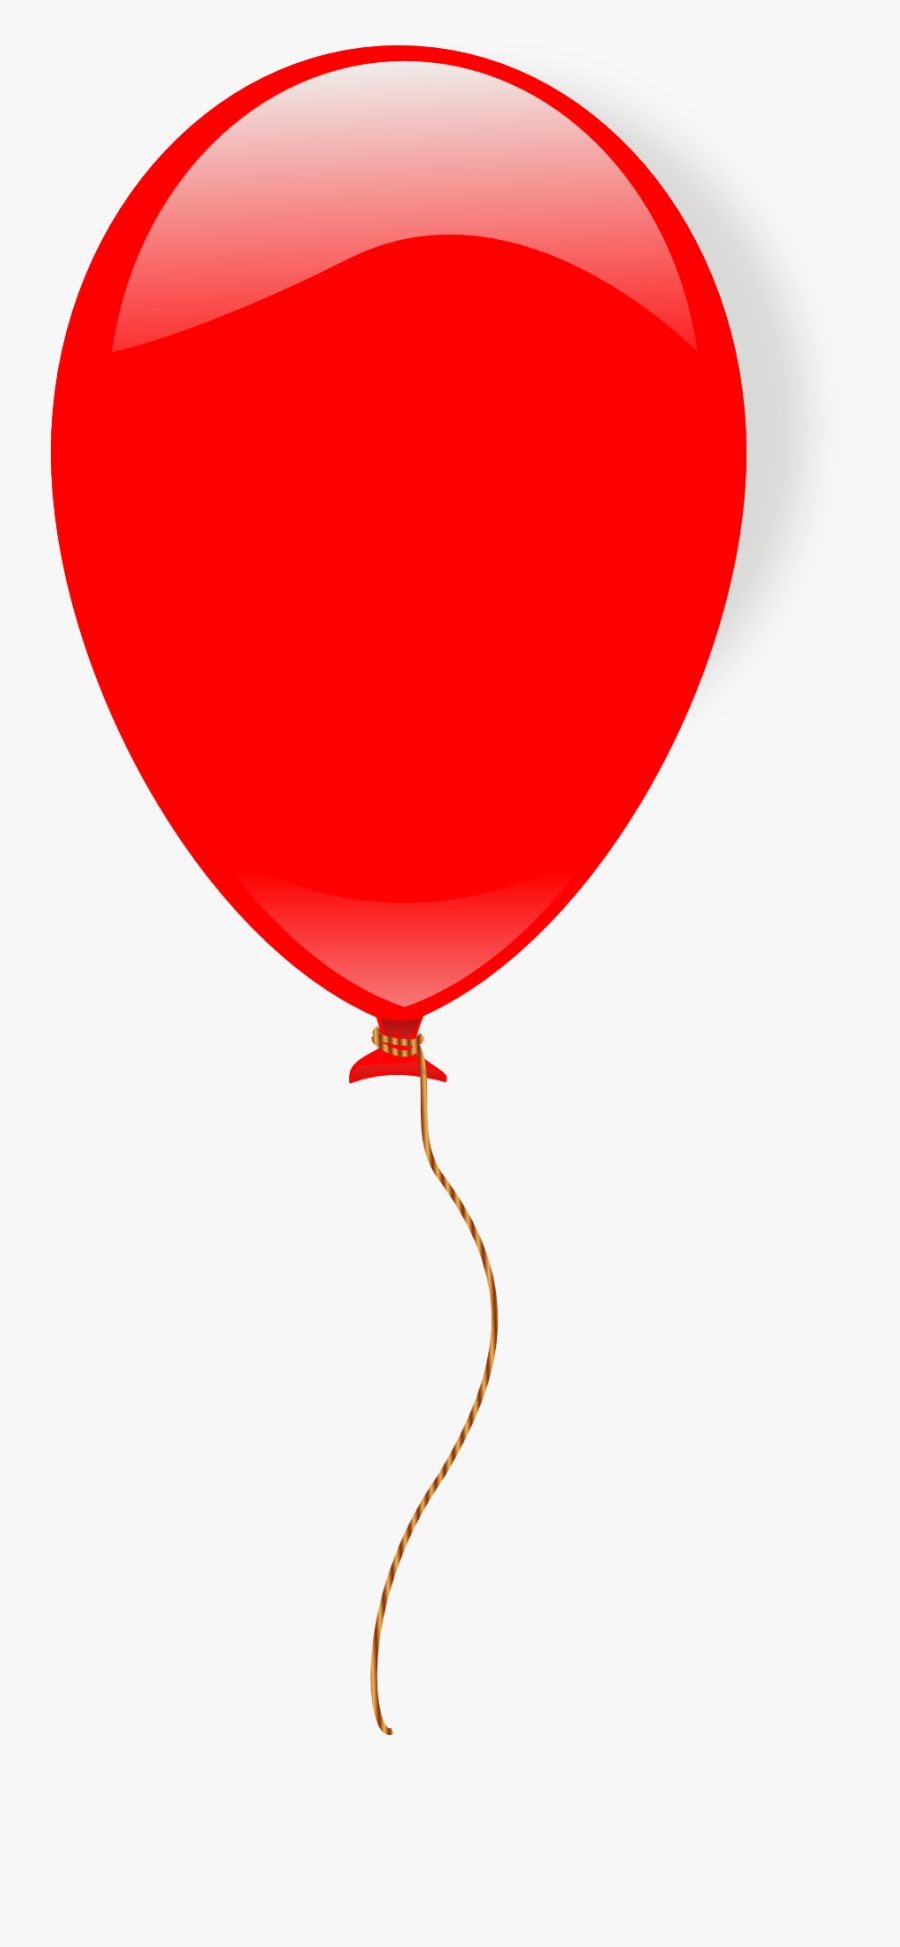 Red Party Balloon Drawing Free Image - Red Balloon Svg, Transparent Clipart